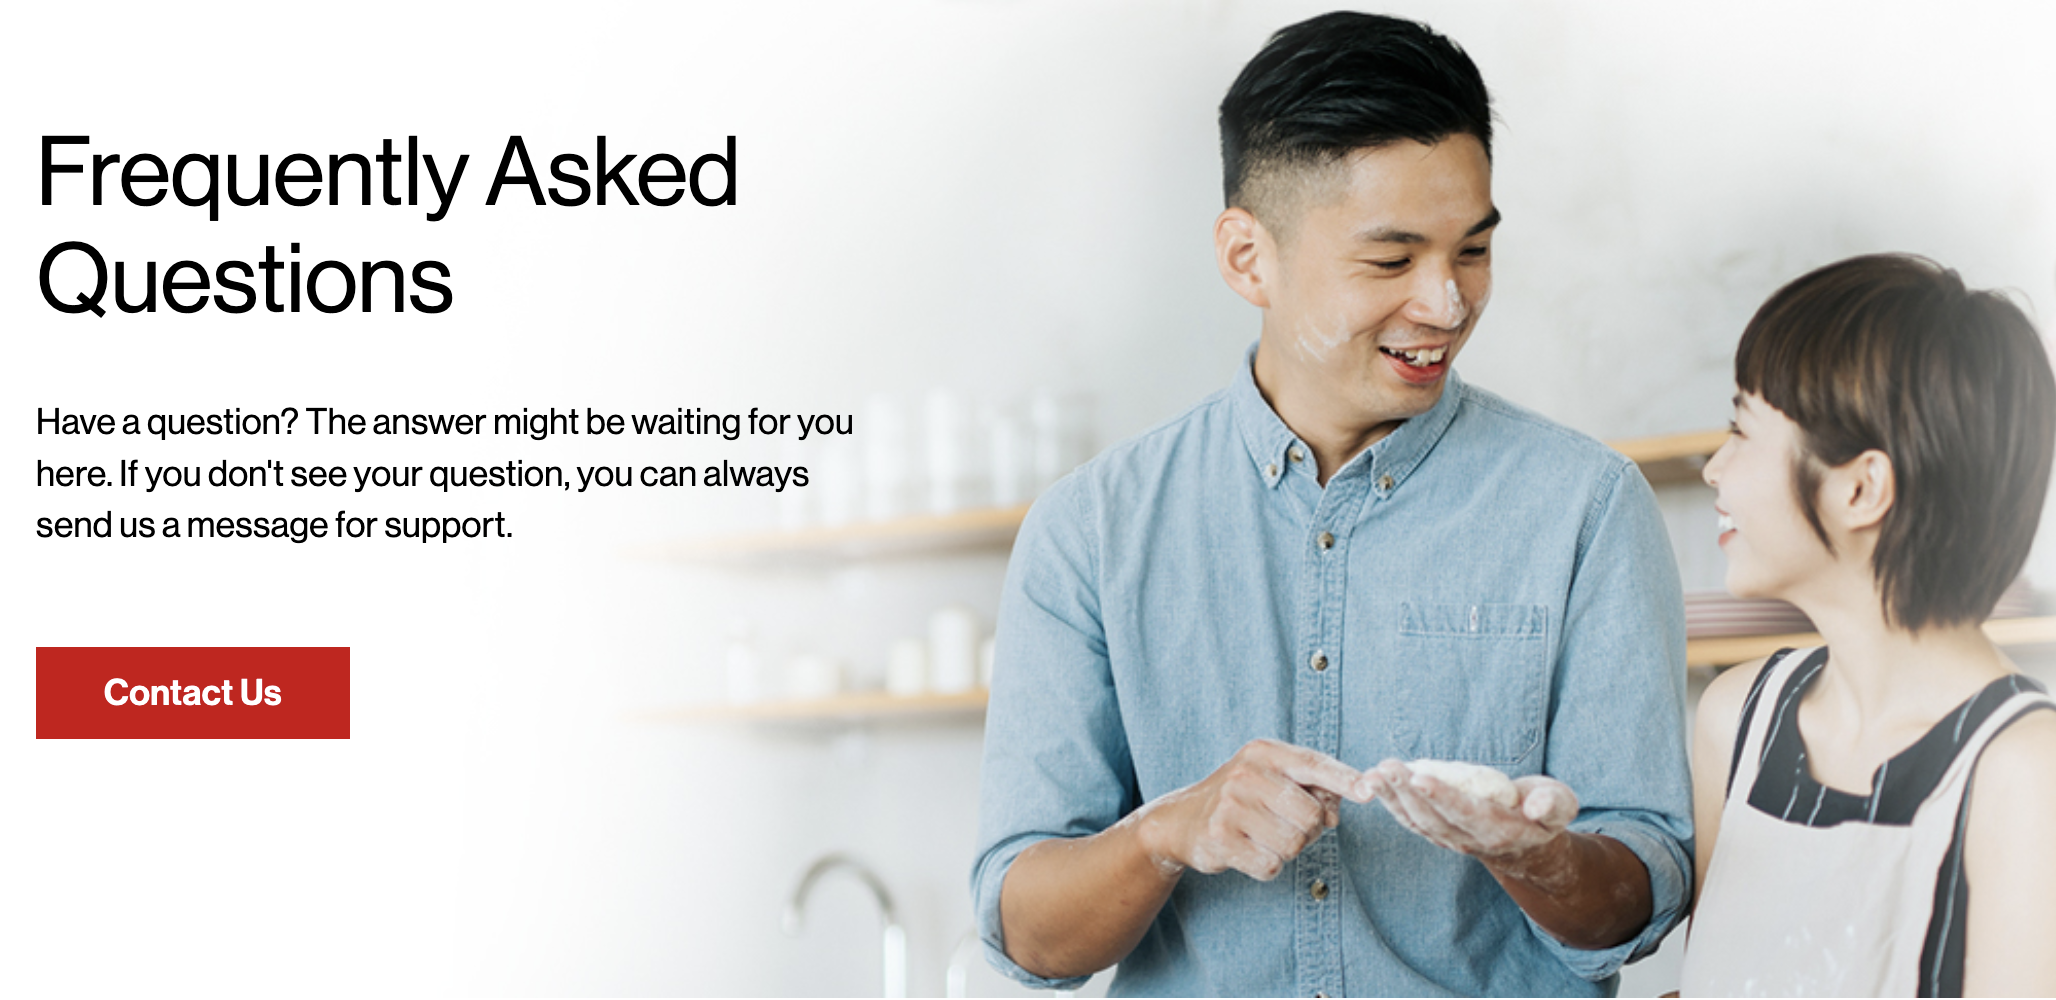 Why does the lead stock art image on Rinnai's FAQ page show a young man seemingly asking, 